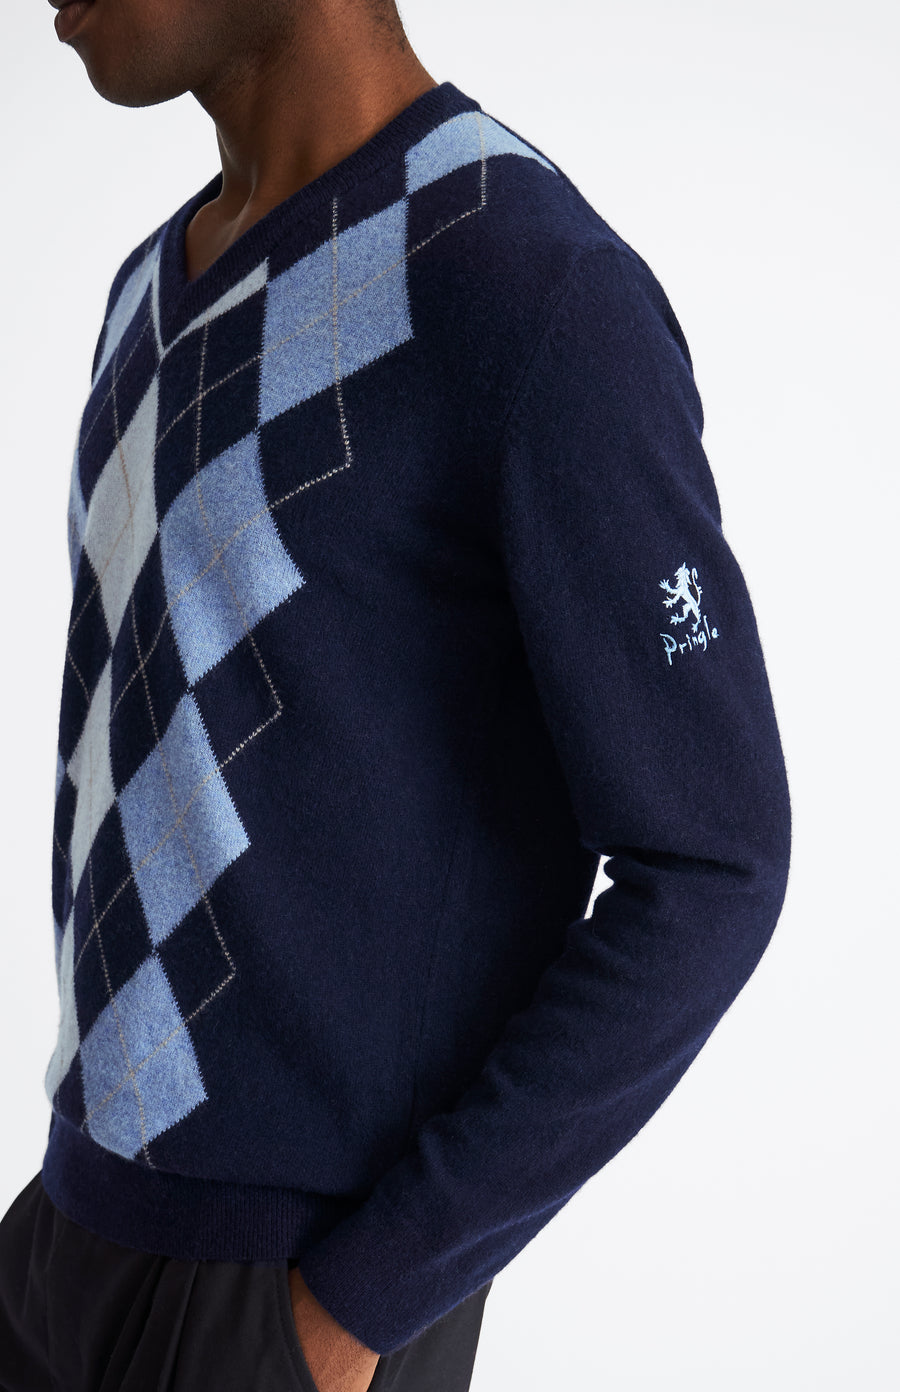 Pringle Men's V Neck Centre Argyle Lambswool Jumper in Navy & Blue showing embroidery